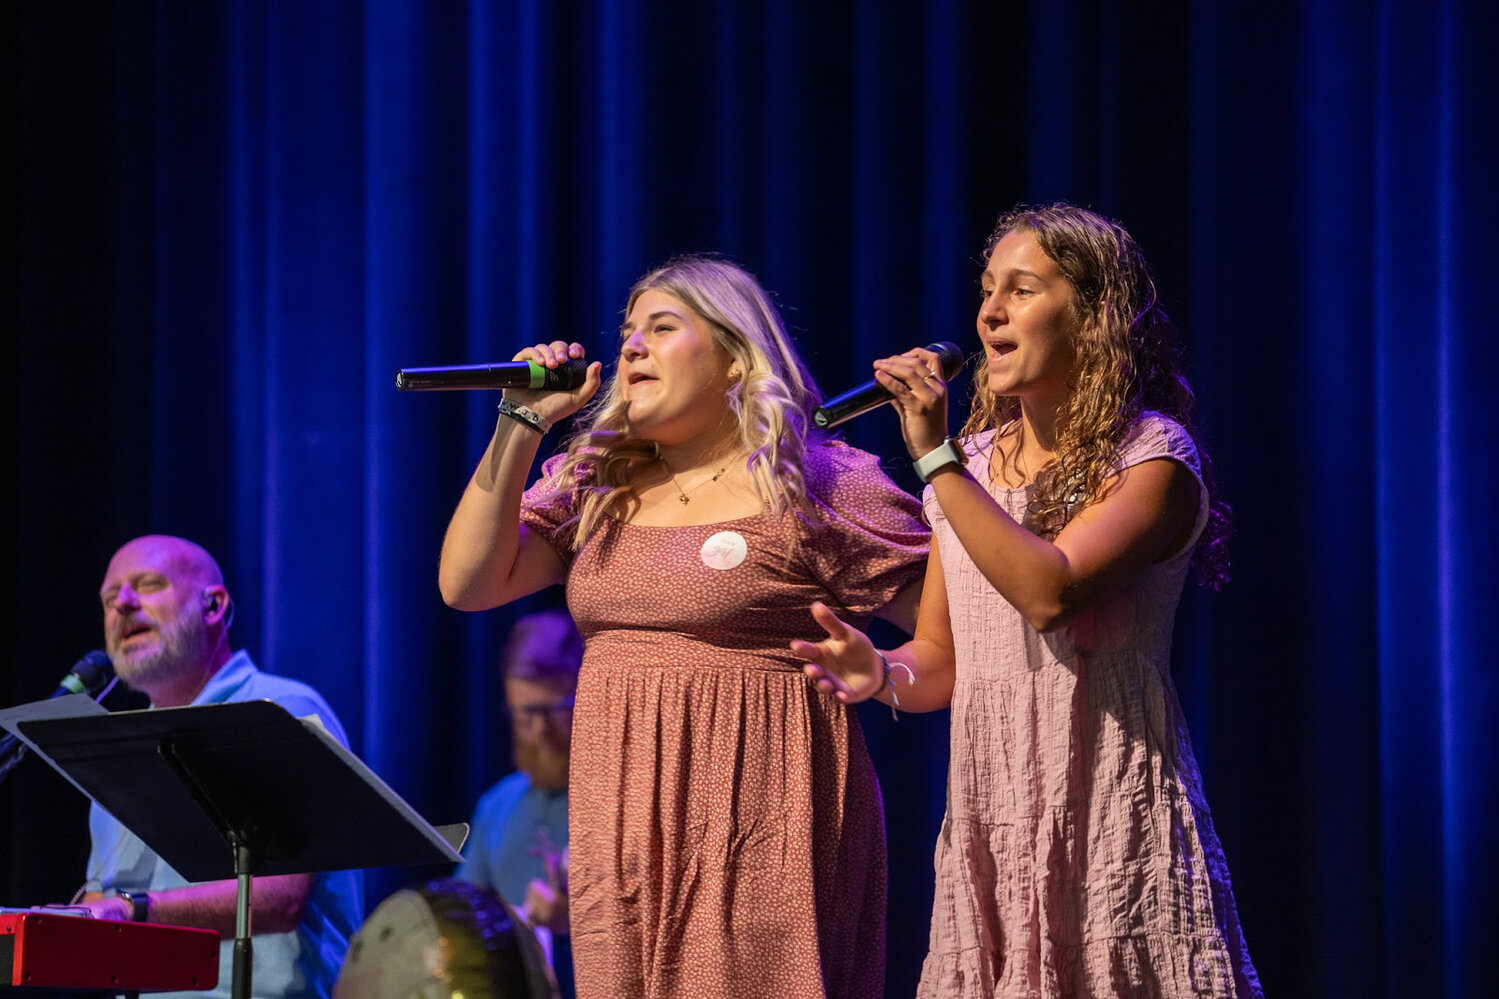 Development and alumni relations coordinator Jason Matthews and student worship leaders Keely Kondracki, left, and Layni Dukes lead the Delmarva Christian student body in praise and worship.